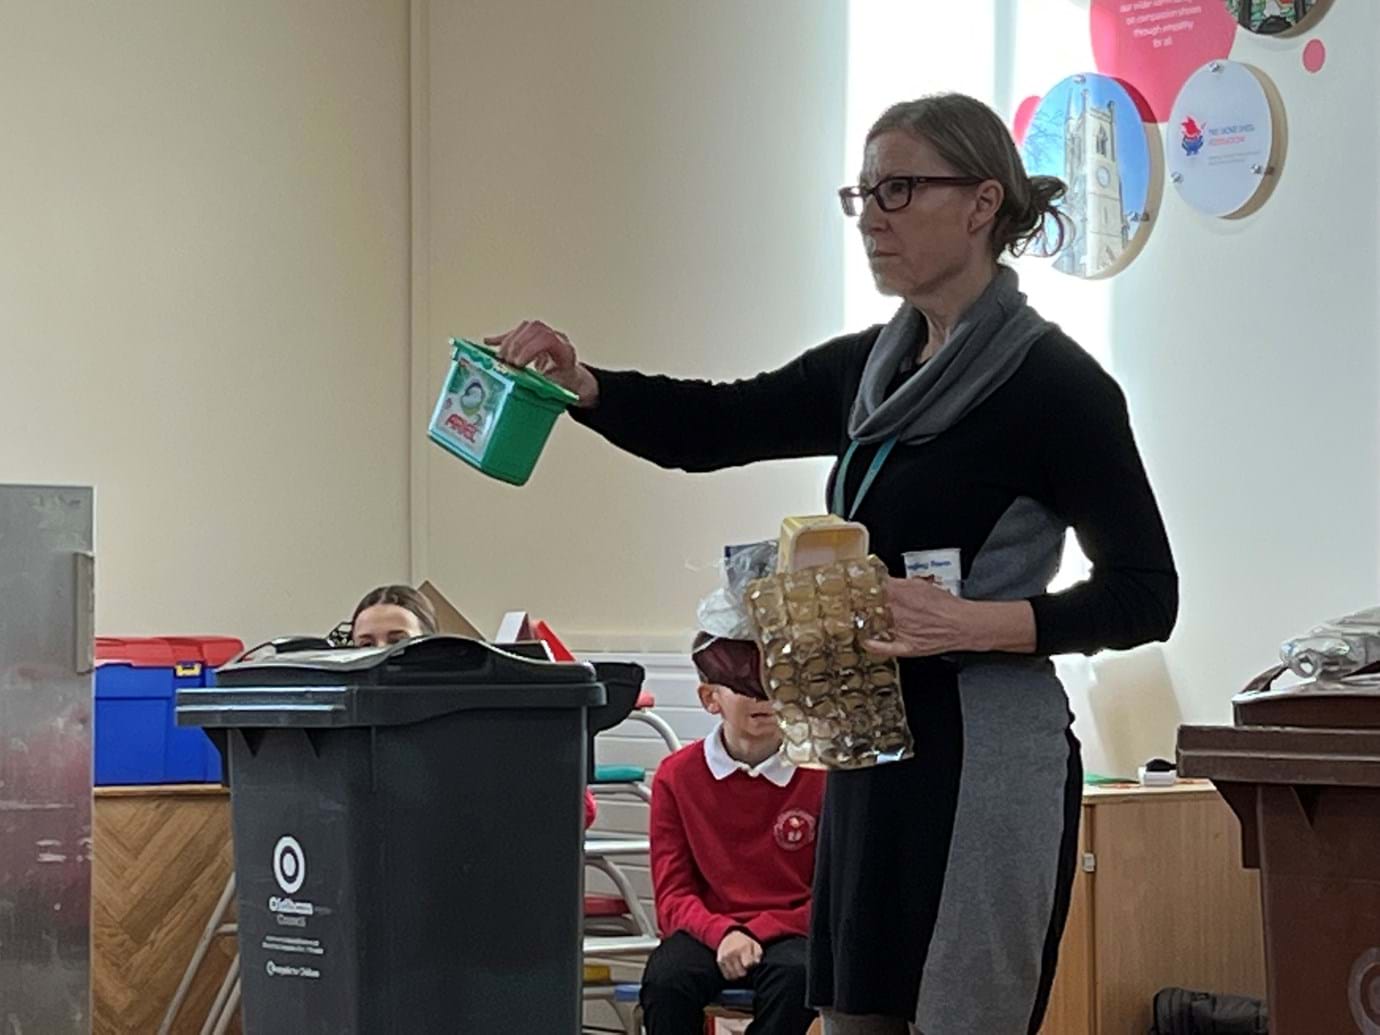 Jointly-led by FCHO's Neighbourhood Care team and Oldham Council’s Waste Management team, pupils enjoyed fun activities to bring to life the subjects of recycling and disposing of waste properly and be encouraged to help their local area.